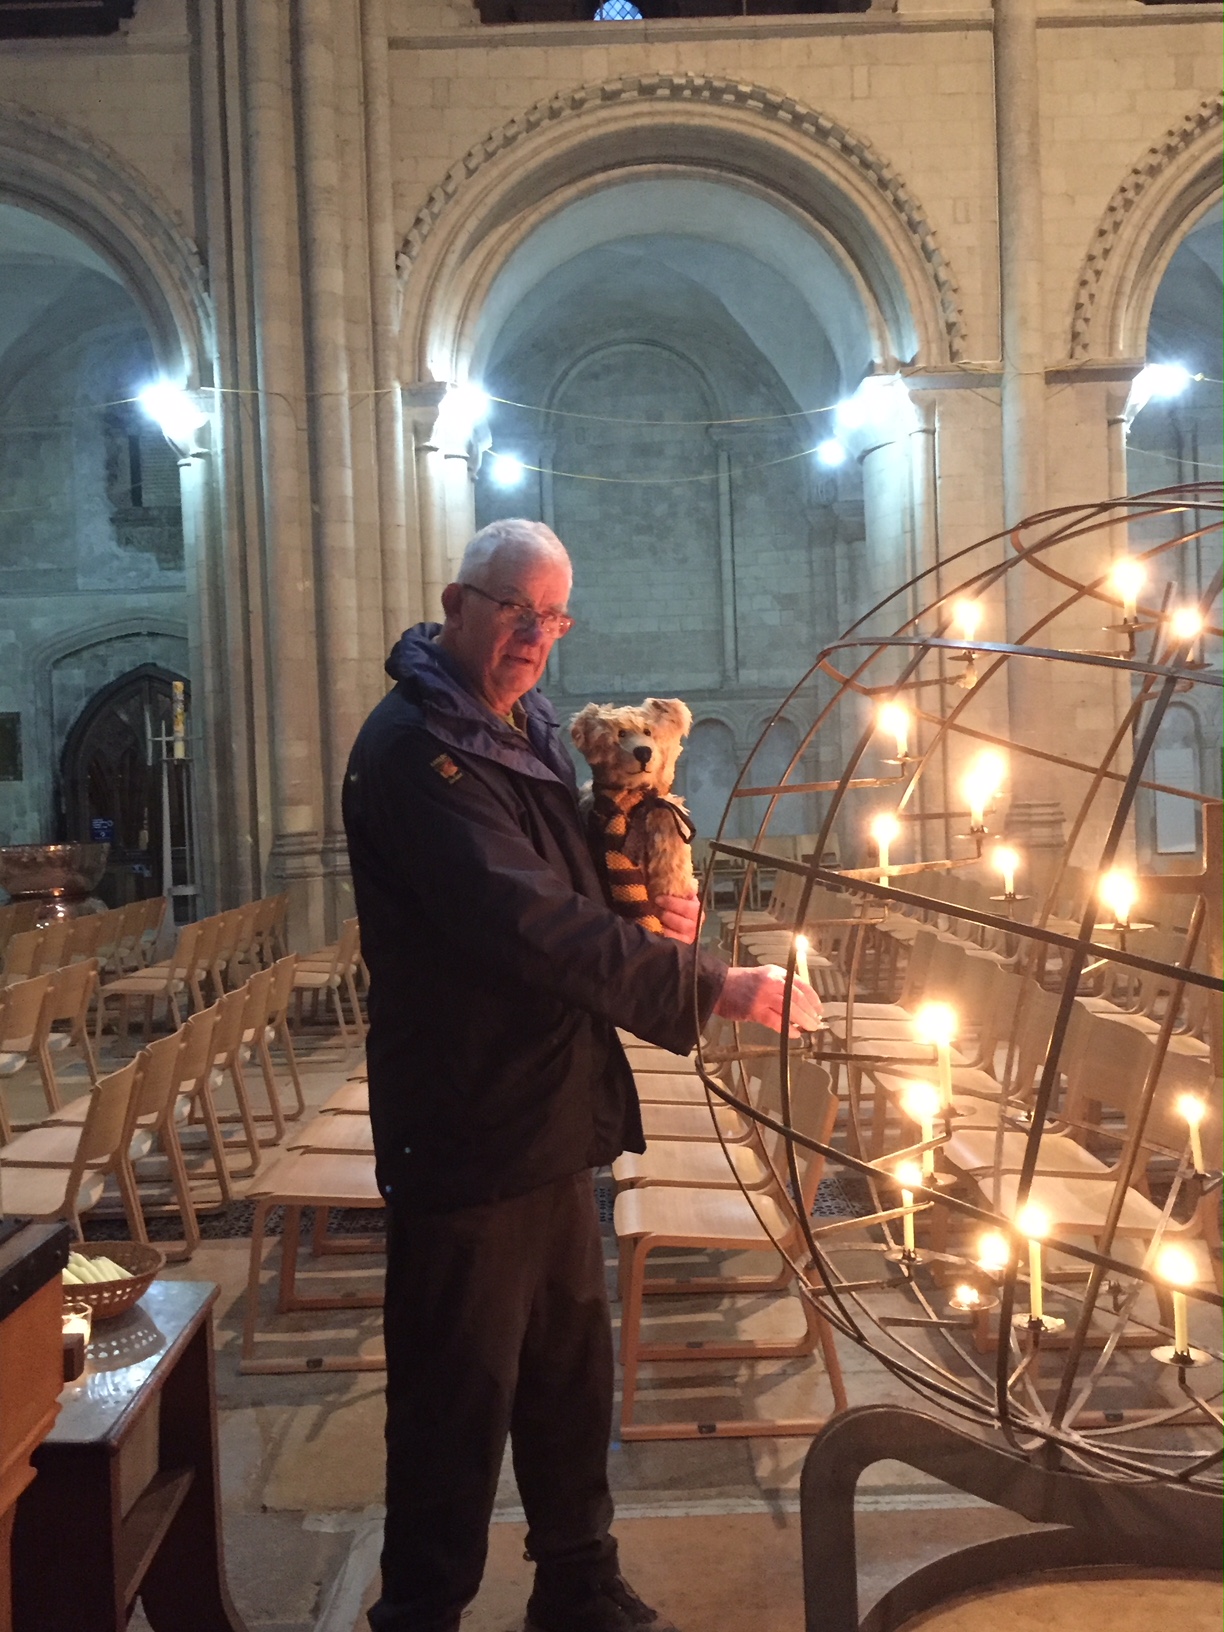 I Died Today: Lighting a Candle to Diddley in Norwich Cathedral.